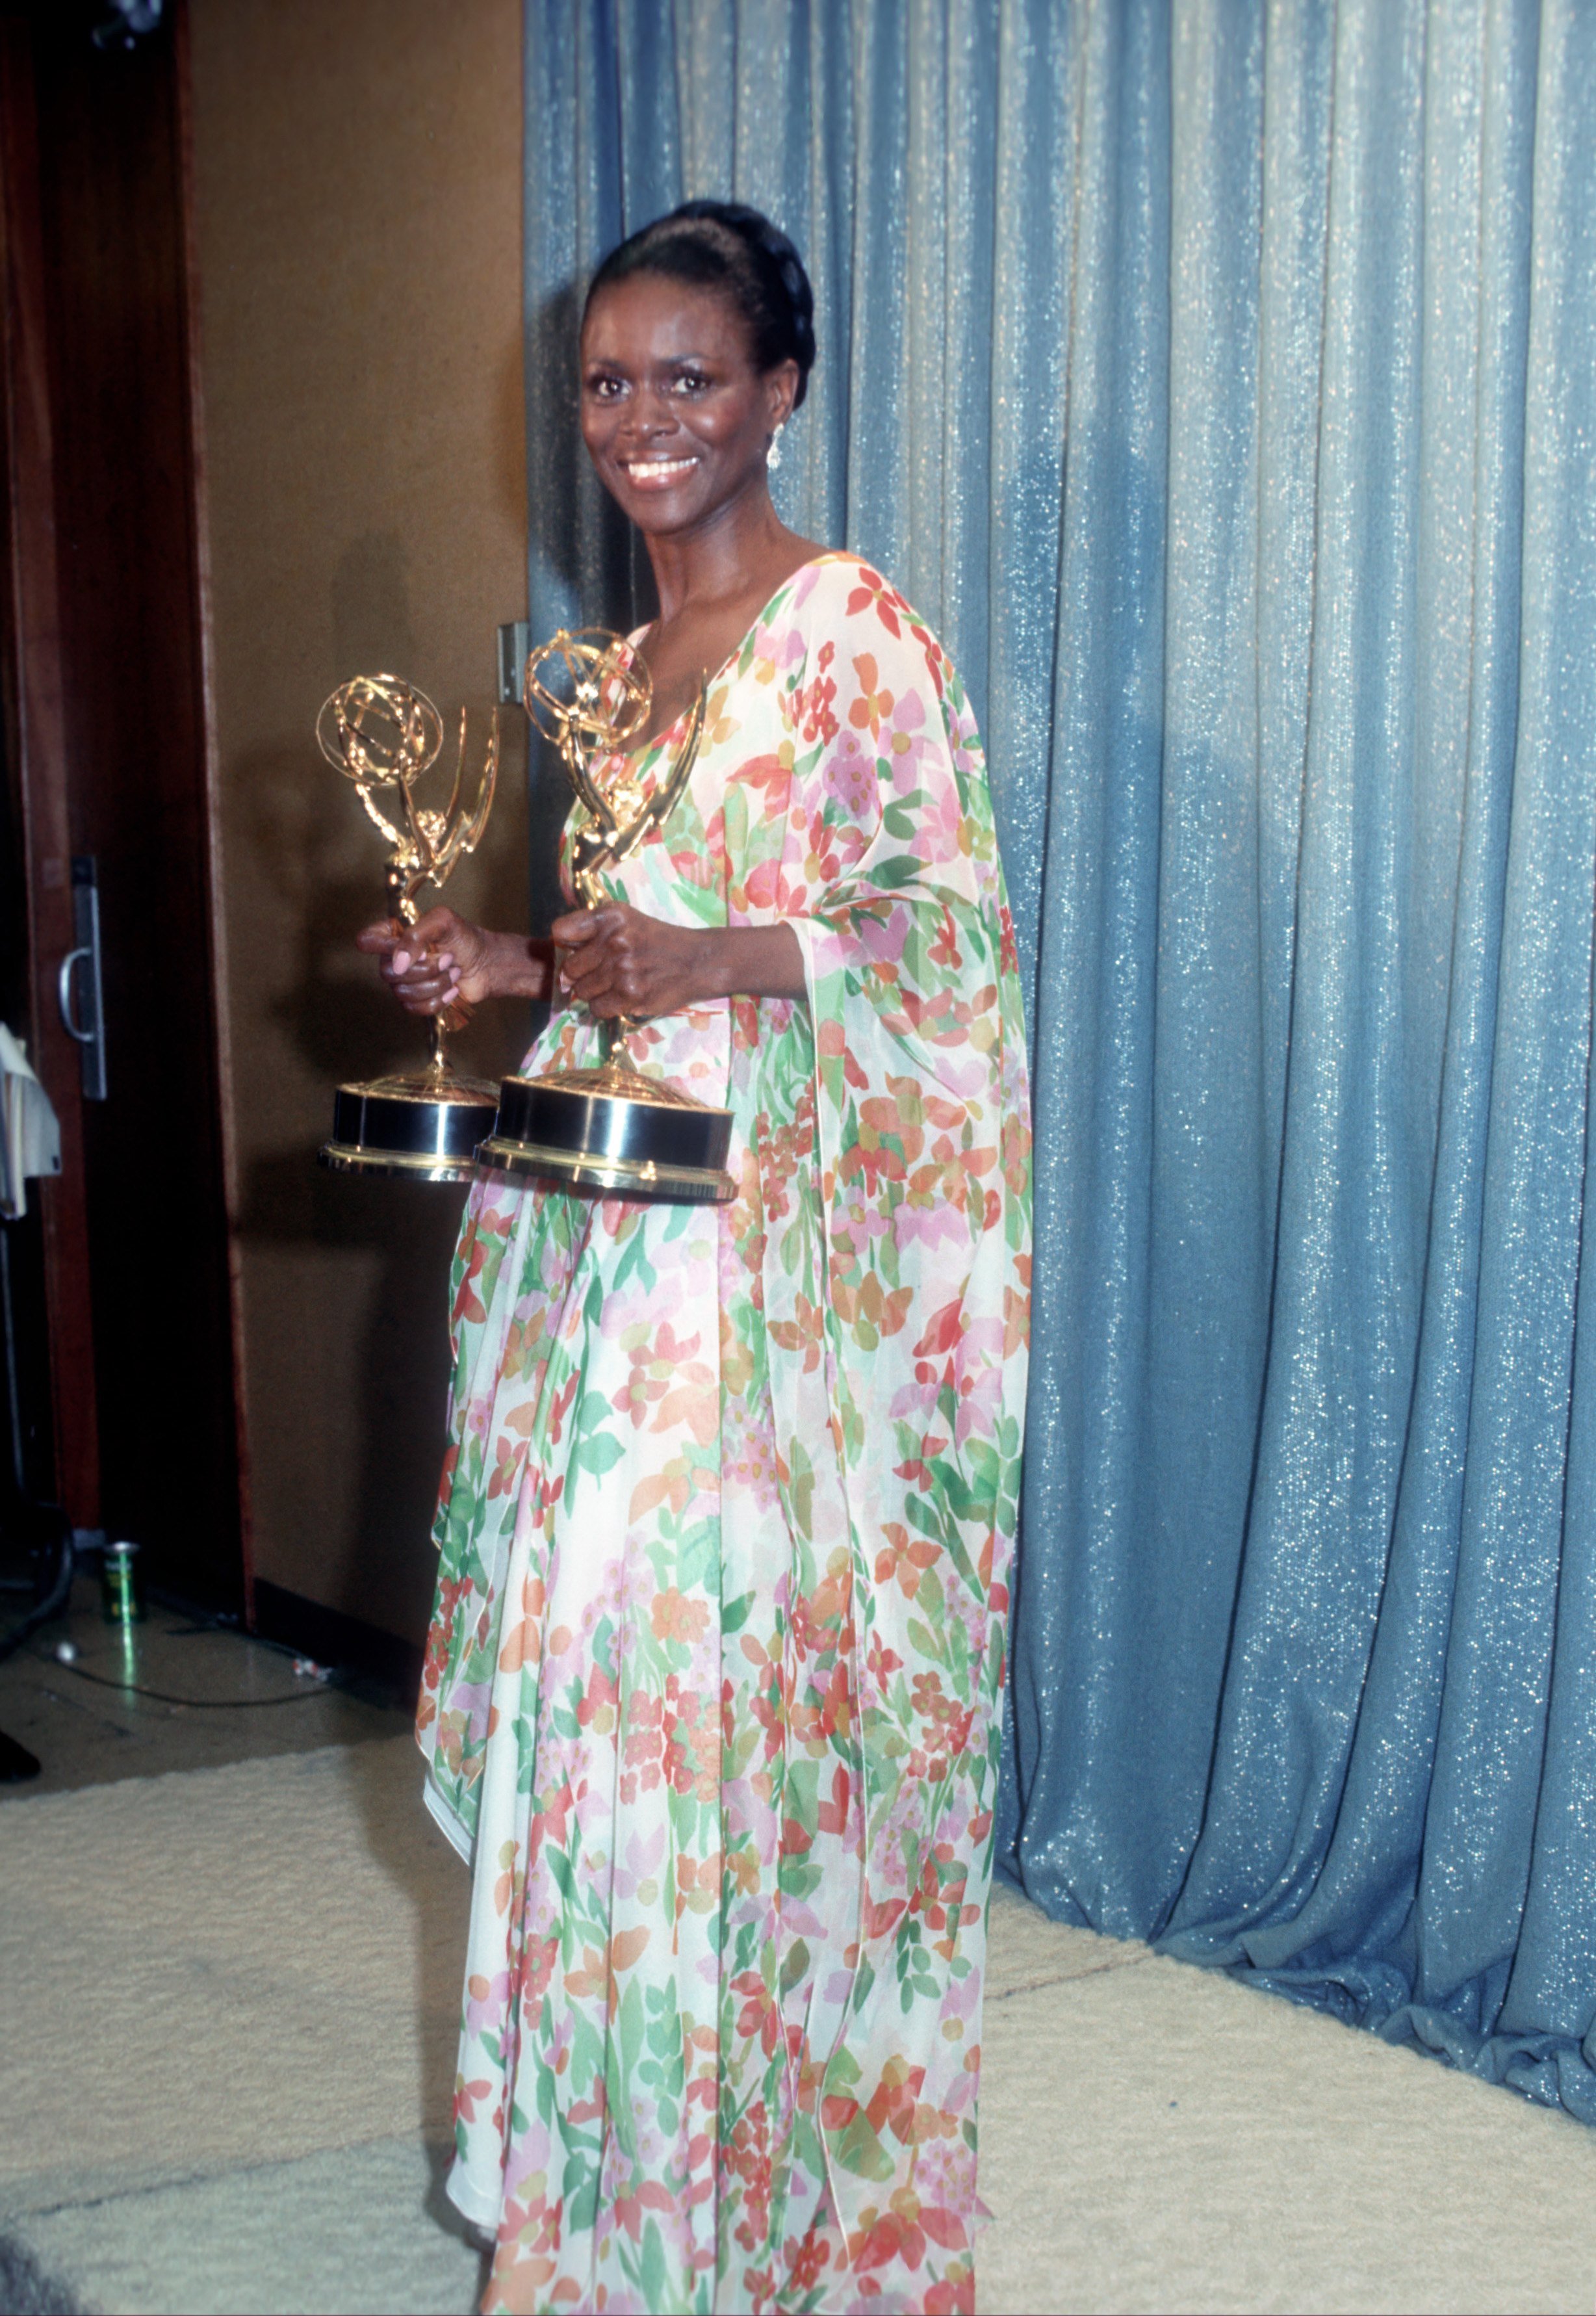 Cicely Tyson holds the two Emmy Awards she won for her performance in "The Autobiography of Miss Jane Pittman" on May 28, 1974 in Los Angeles, California. | Photo: Getty Images